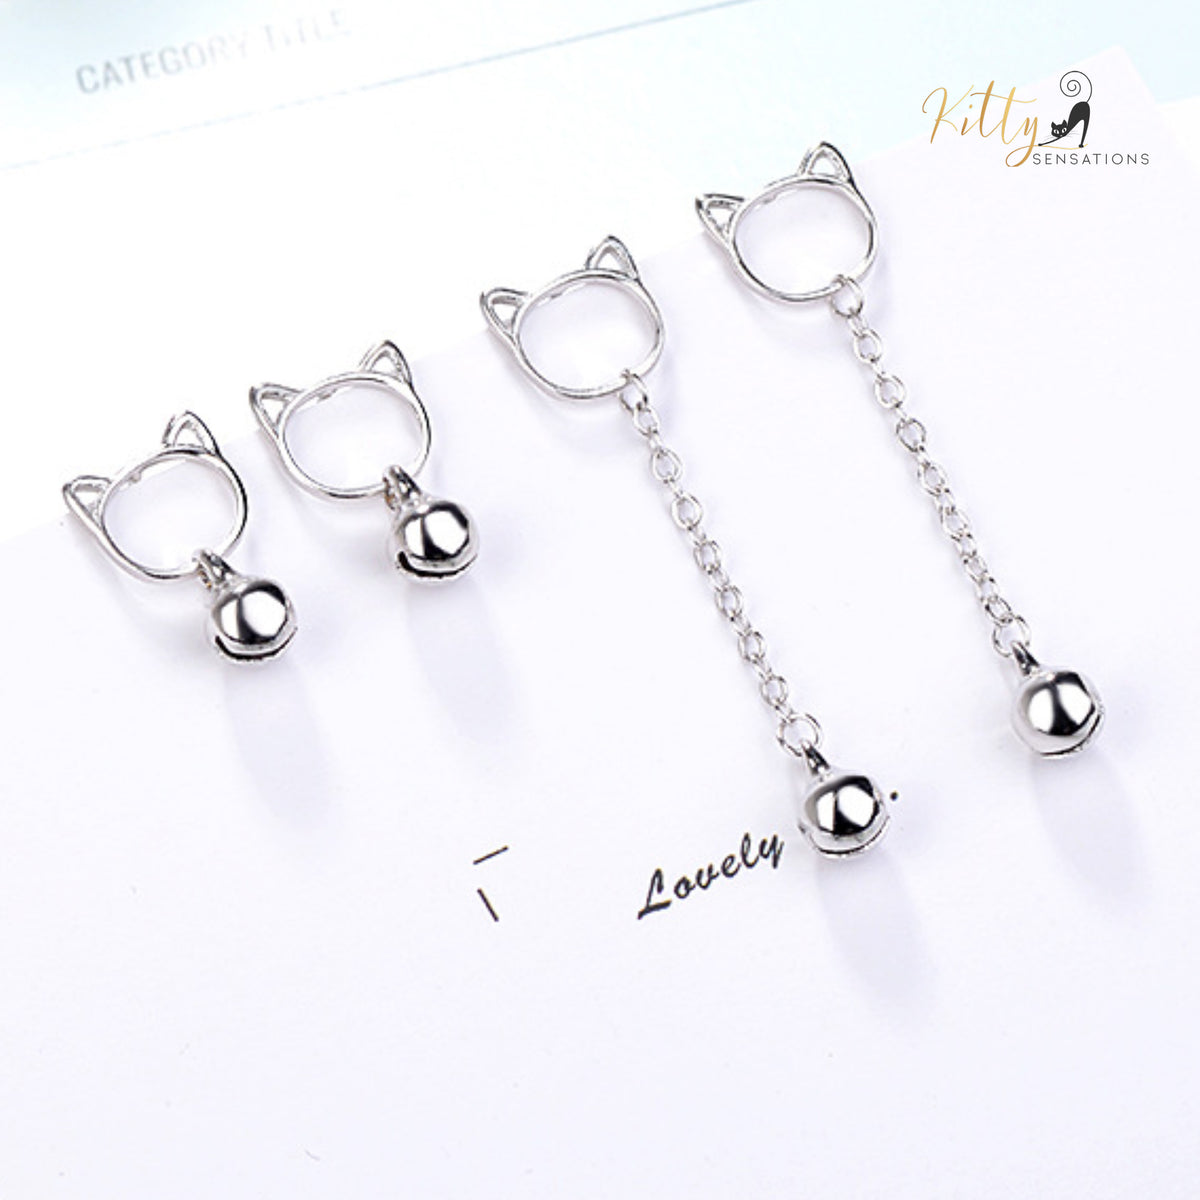 Purrfection Cat Earrings with Hanging Bell Charm